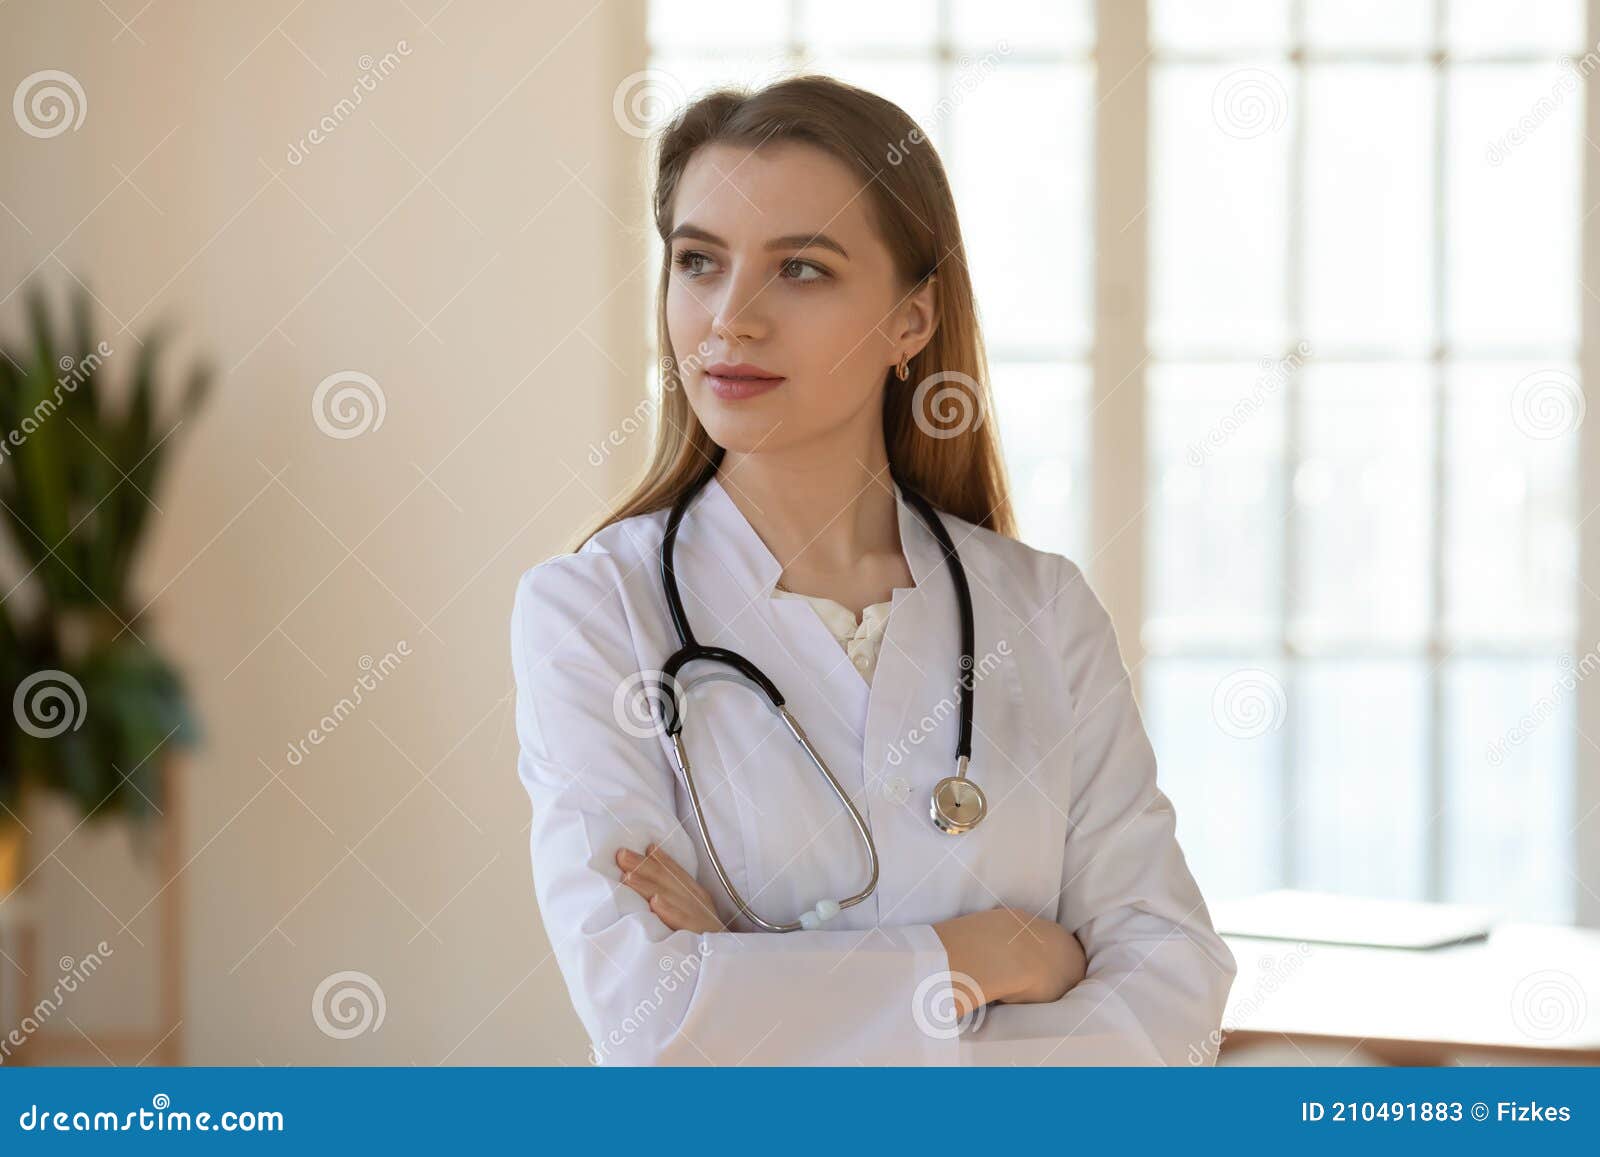 thoughtful confident doctor standing in office looking aside planning decision